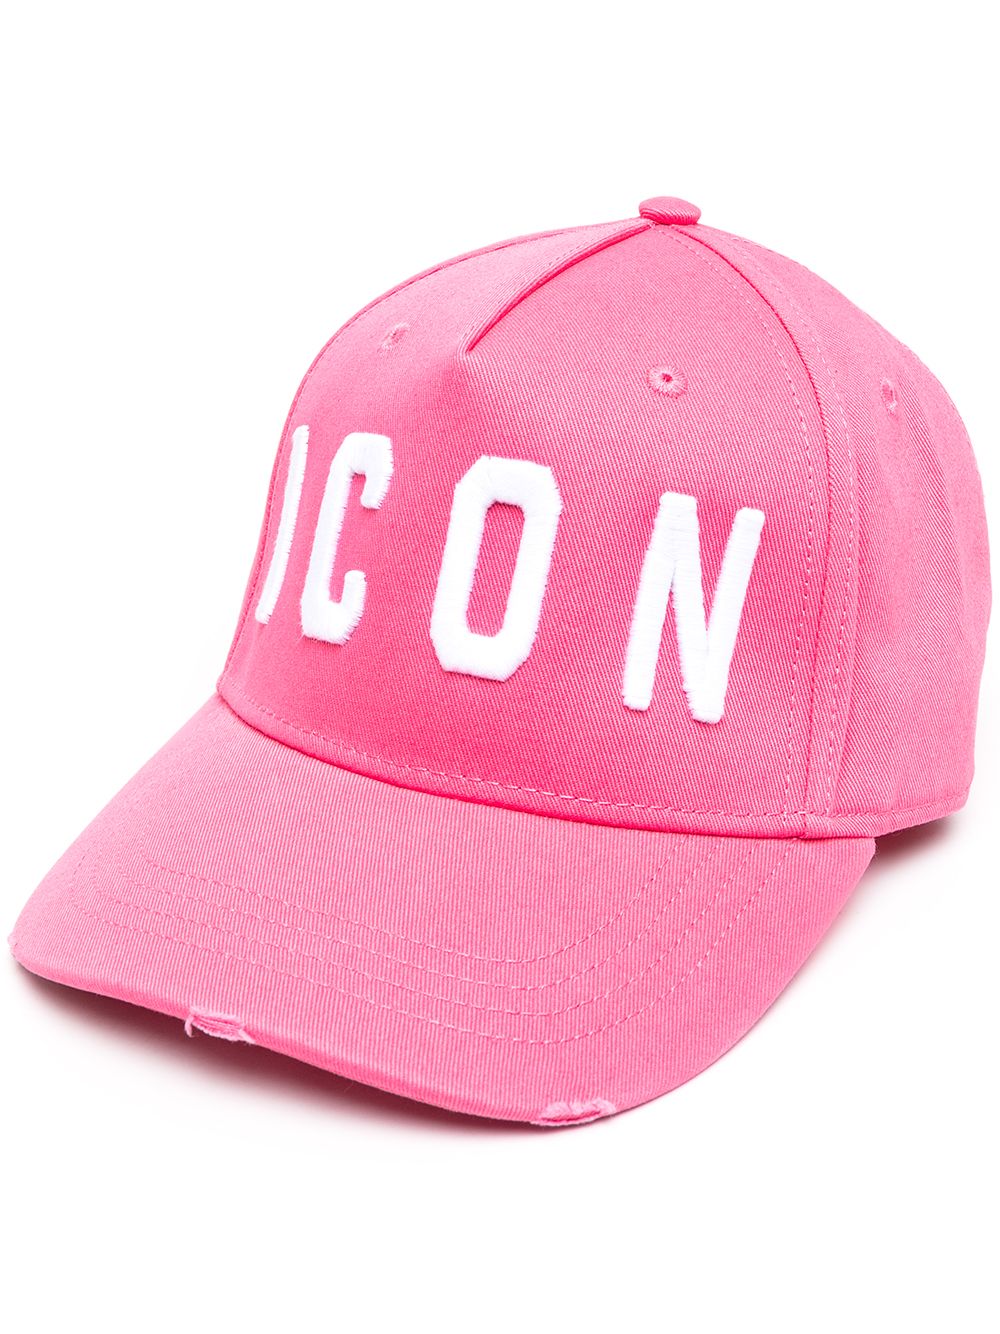 Dsquared2 logo-embroidered baseball cap - Pink von Dsquared2